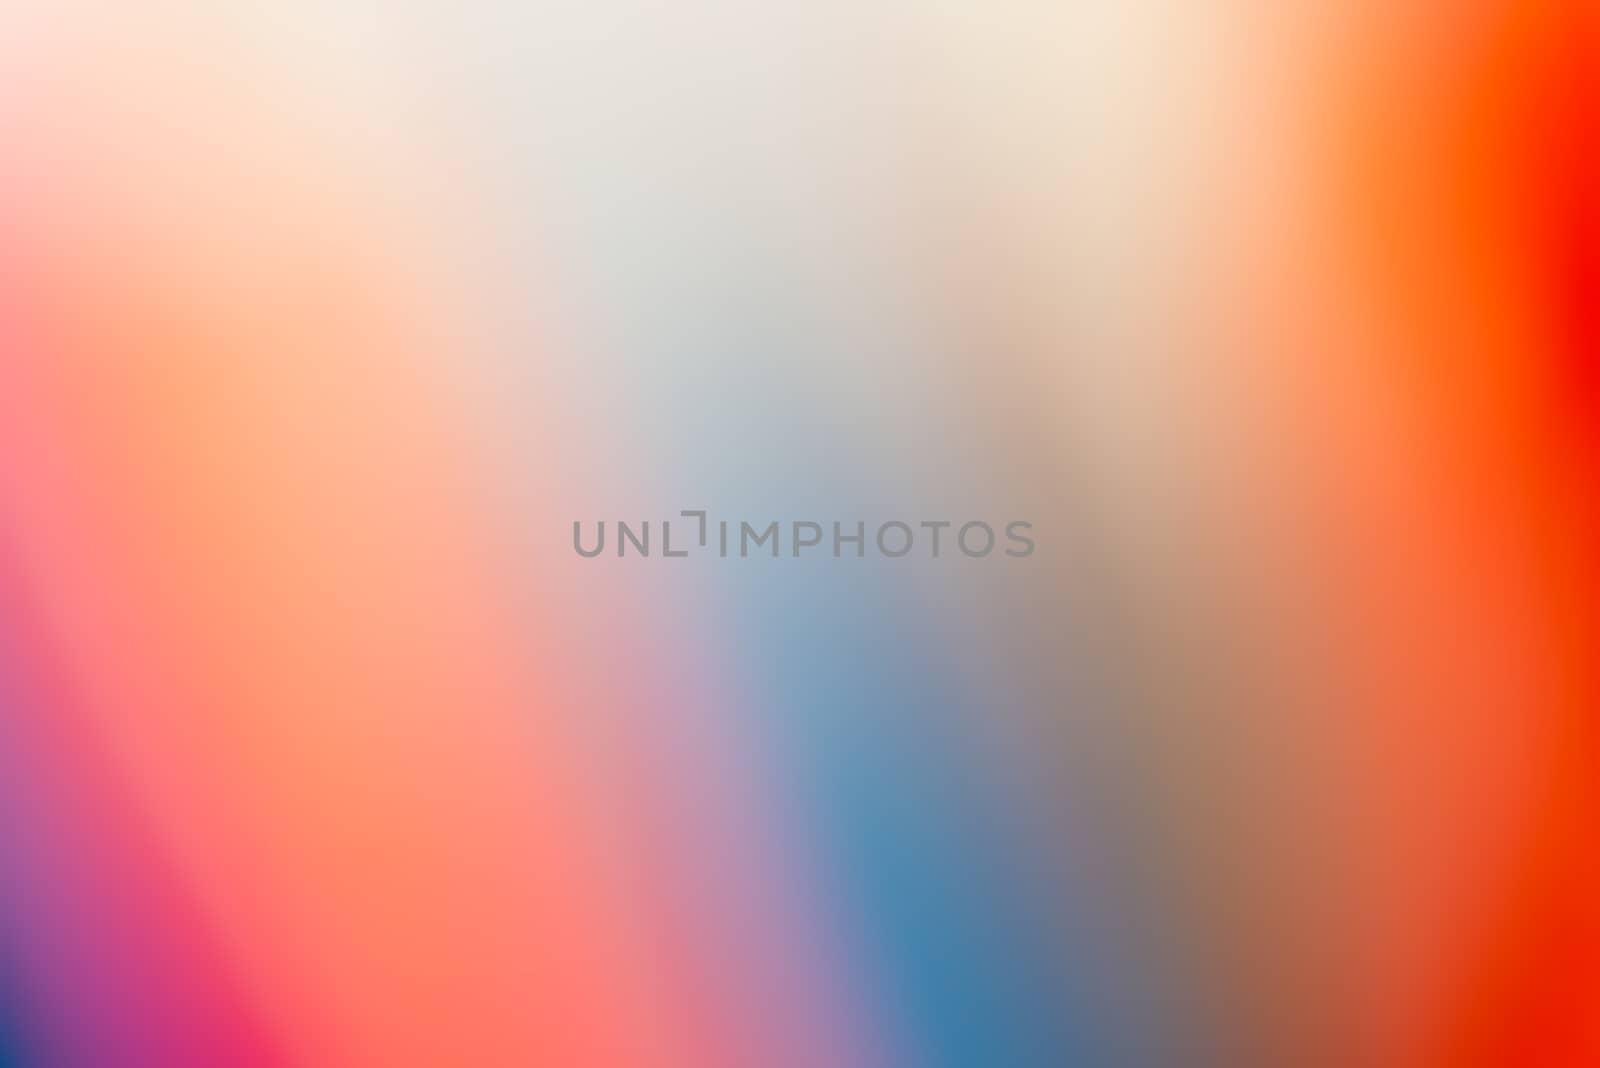 Blurred and colorful abstract gradient background by dutourdumonde